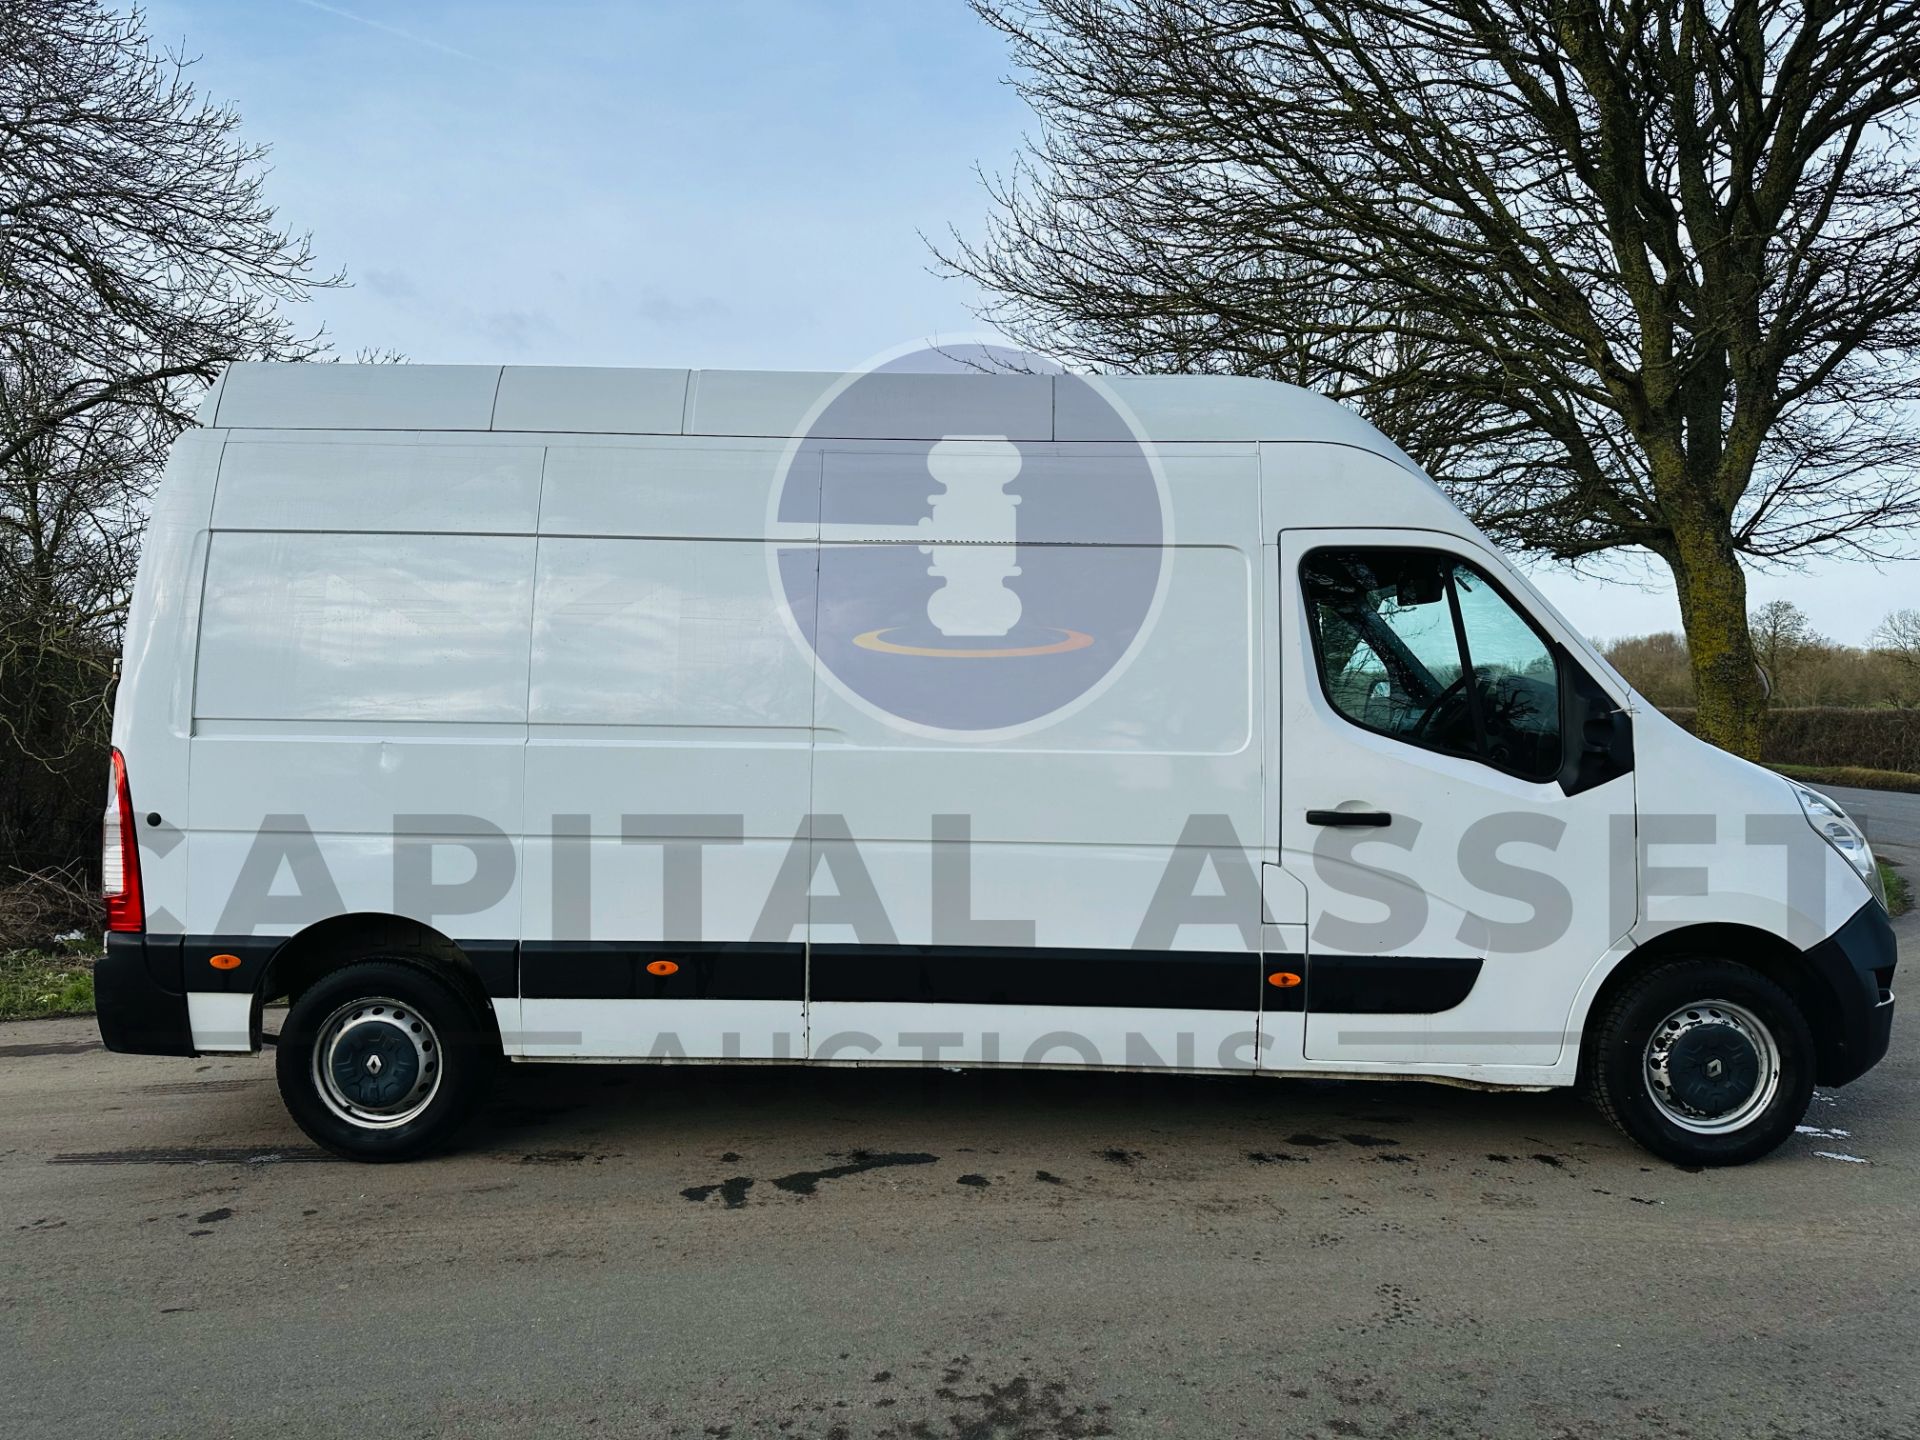 (On Sale) RENAULT MASTER *BUSINESS ENERGY* LWB EXTRA HI-ROOF (2019 - EURO 6) 2.3 DCI - 145 BHP - Image 9 of 25